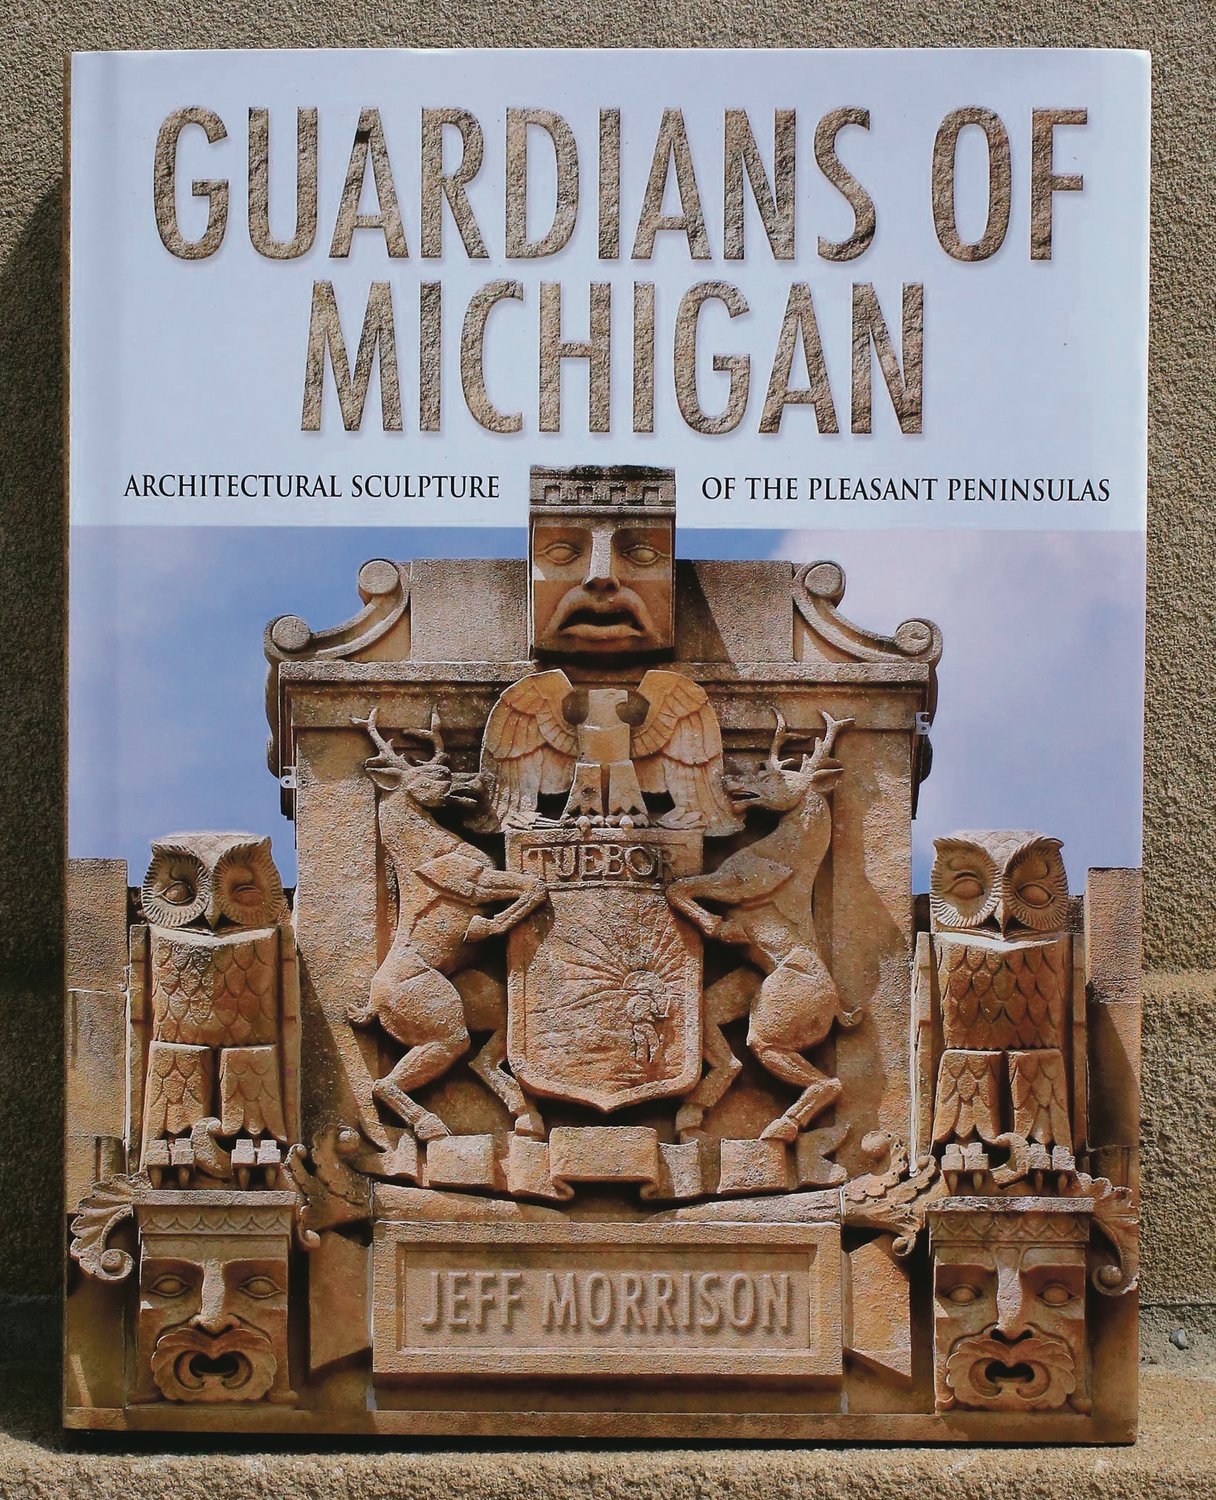 “Guardians of Michigan: Architectural Sculpture of the Pleasant Peninsula” is out now via the University of Michigan Press.